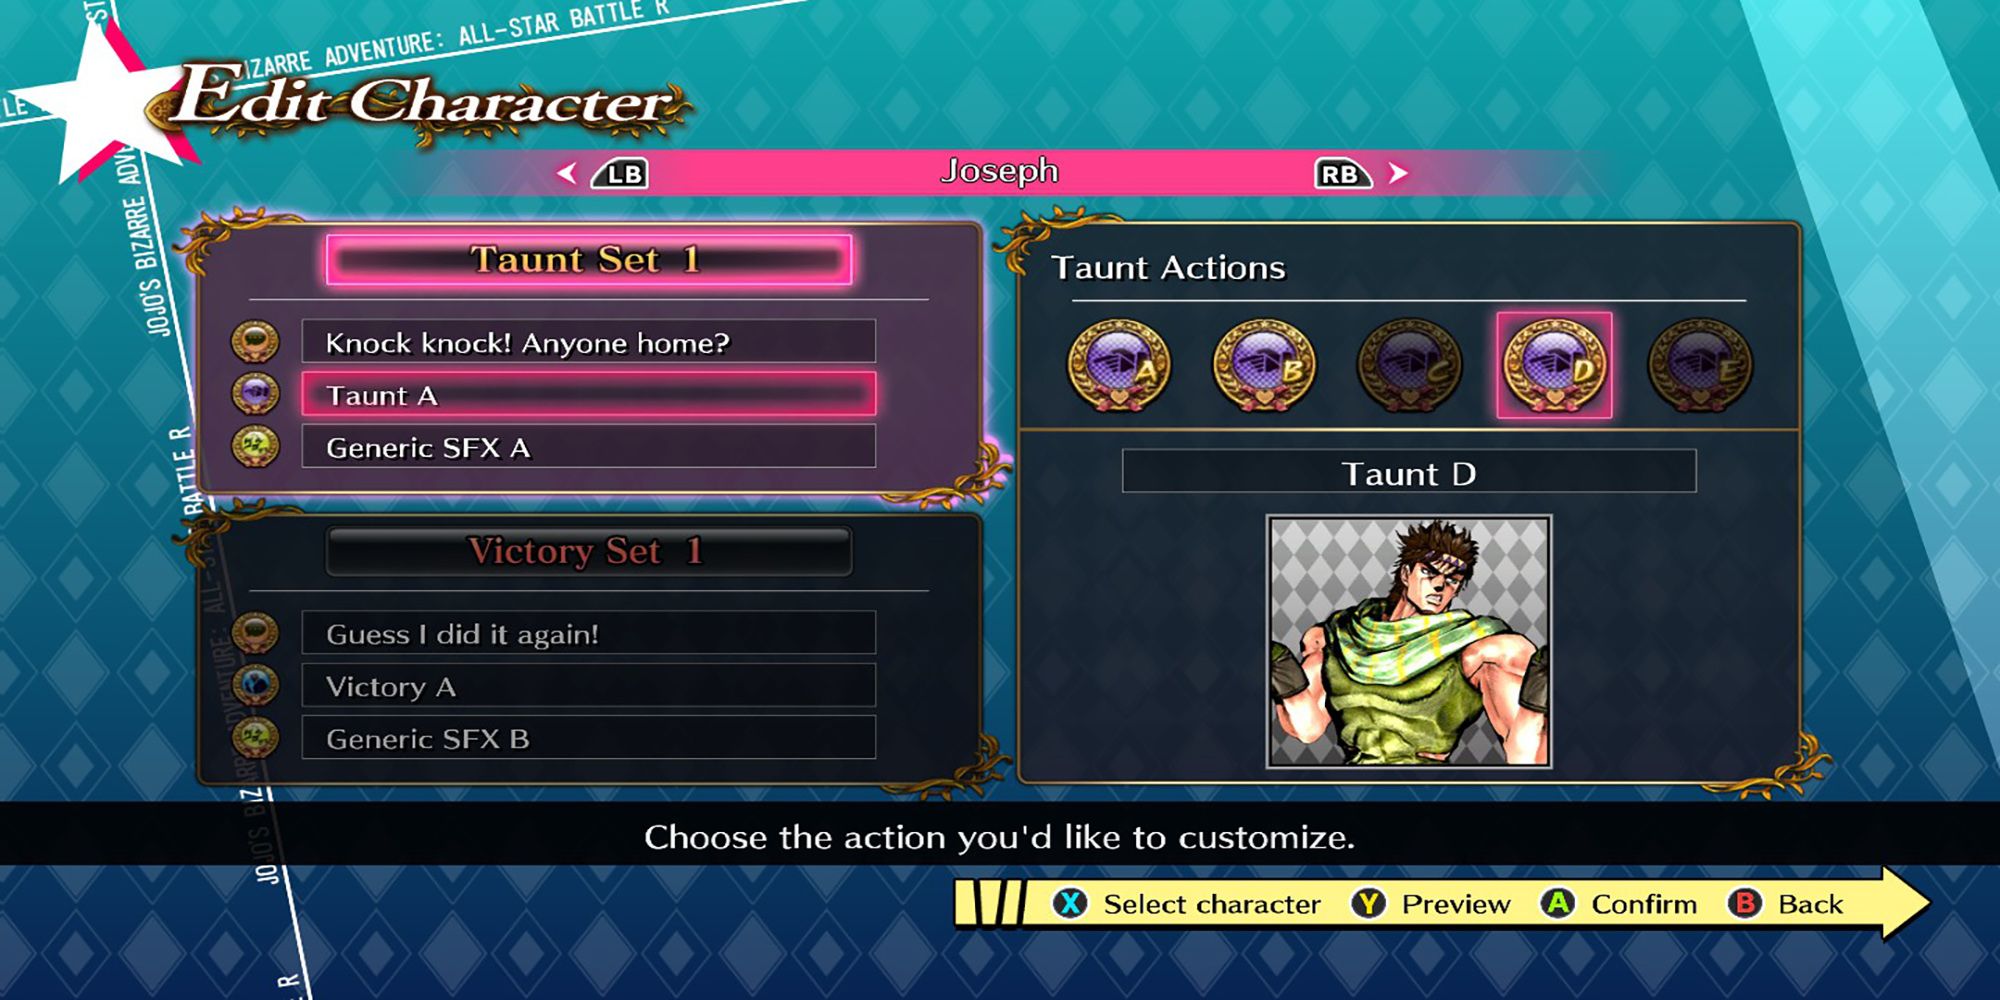 You can choose one of several unique poses for your character to perform while taunting an opponent in Jojo's Bizarre Adventure ASBR.